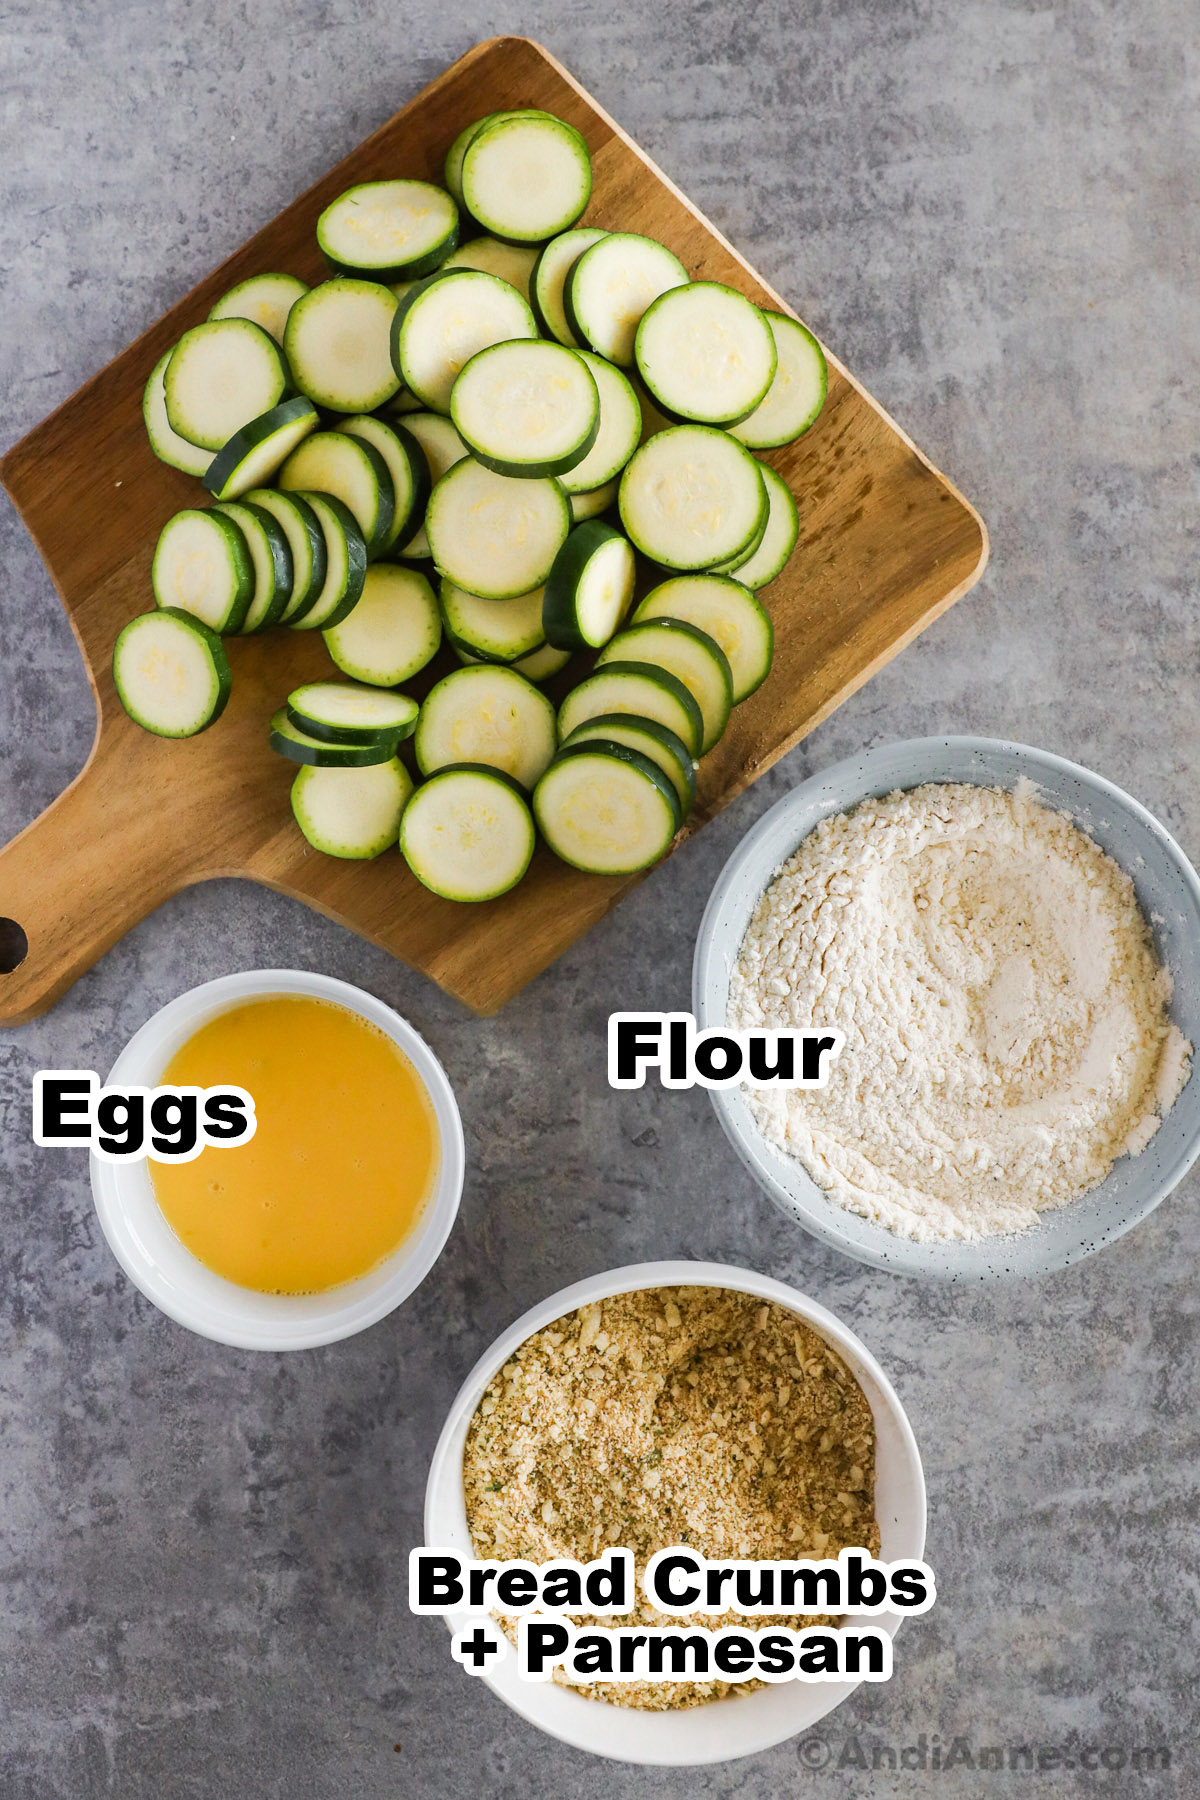 Slice zucchini and three bowls, one with beaten eggs, one with flour, one with bread crumbs.